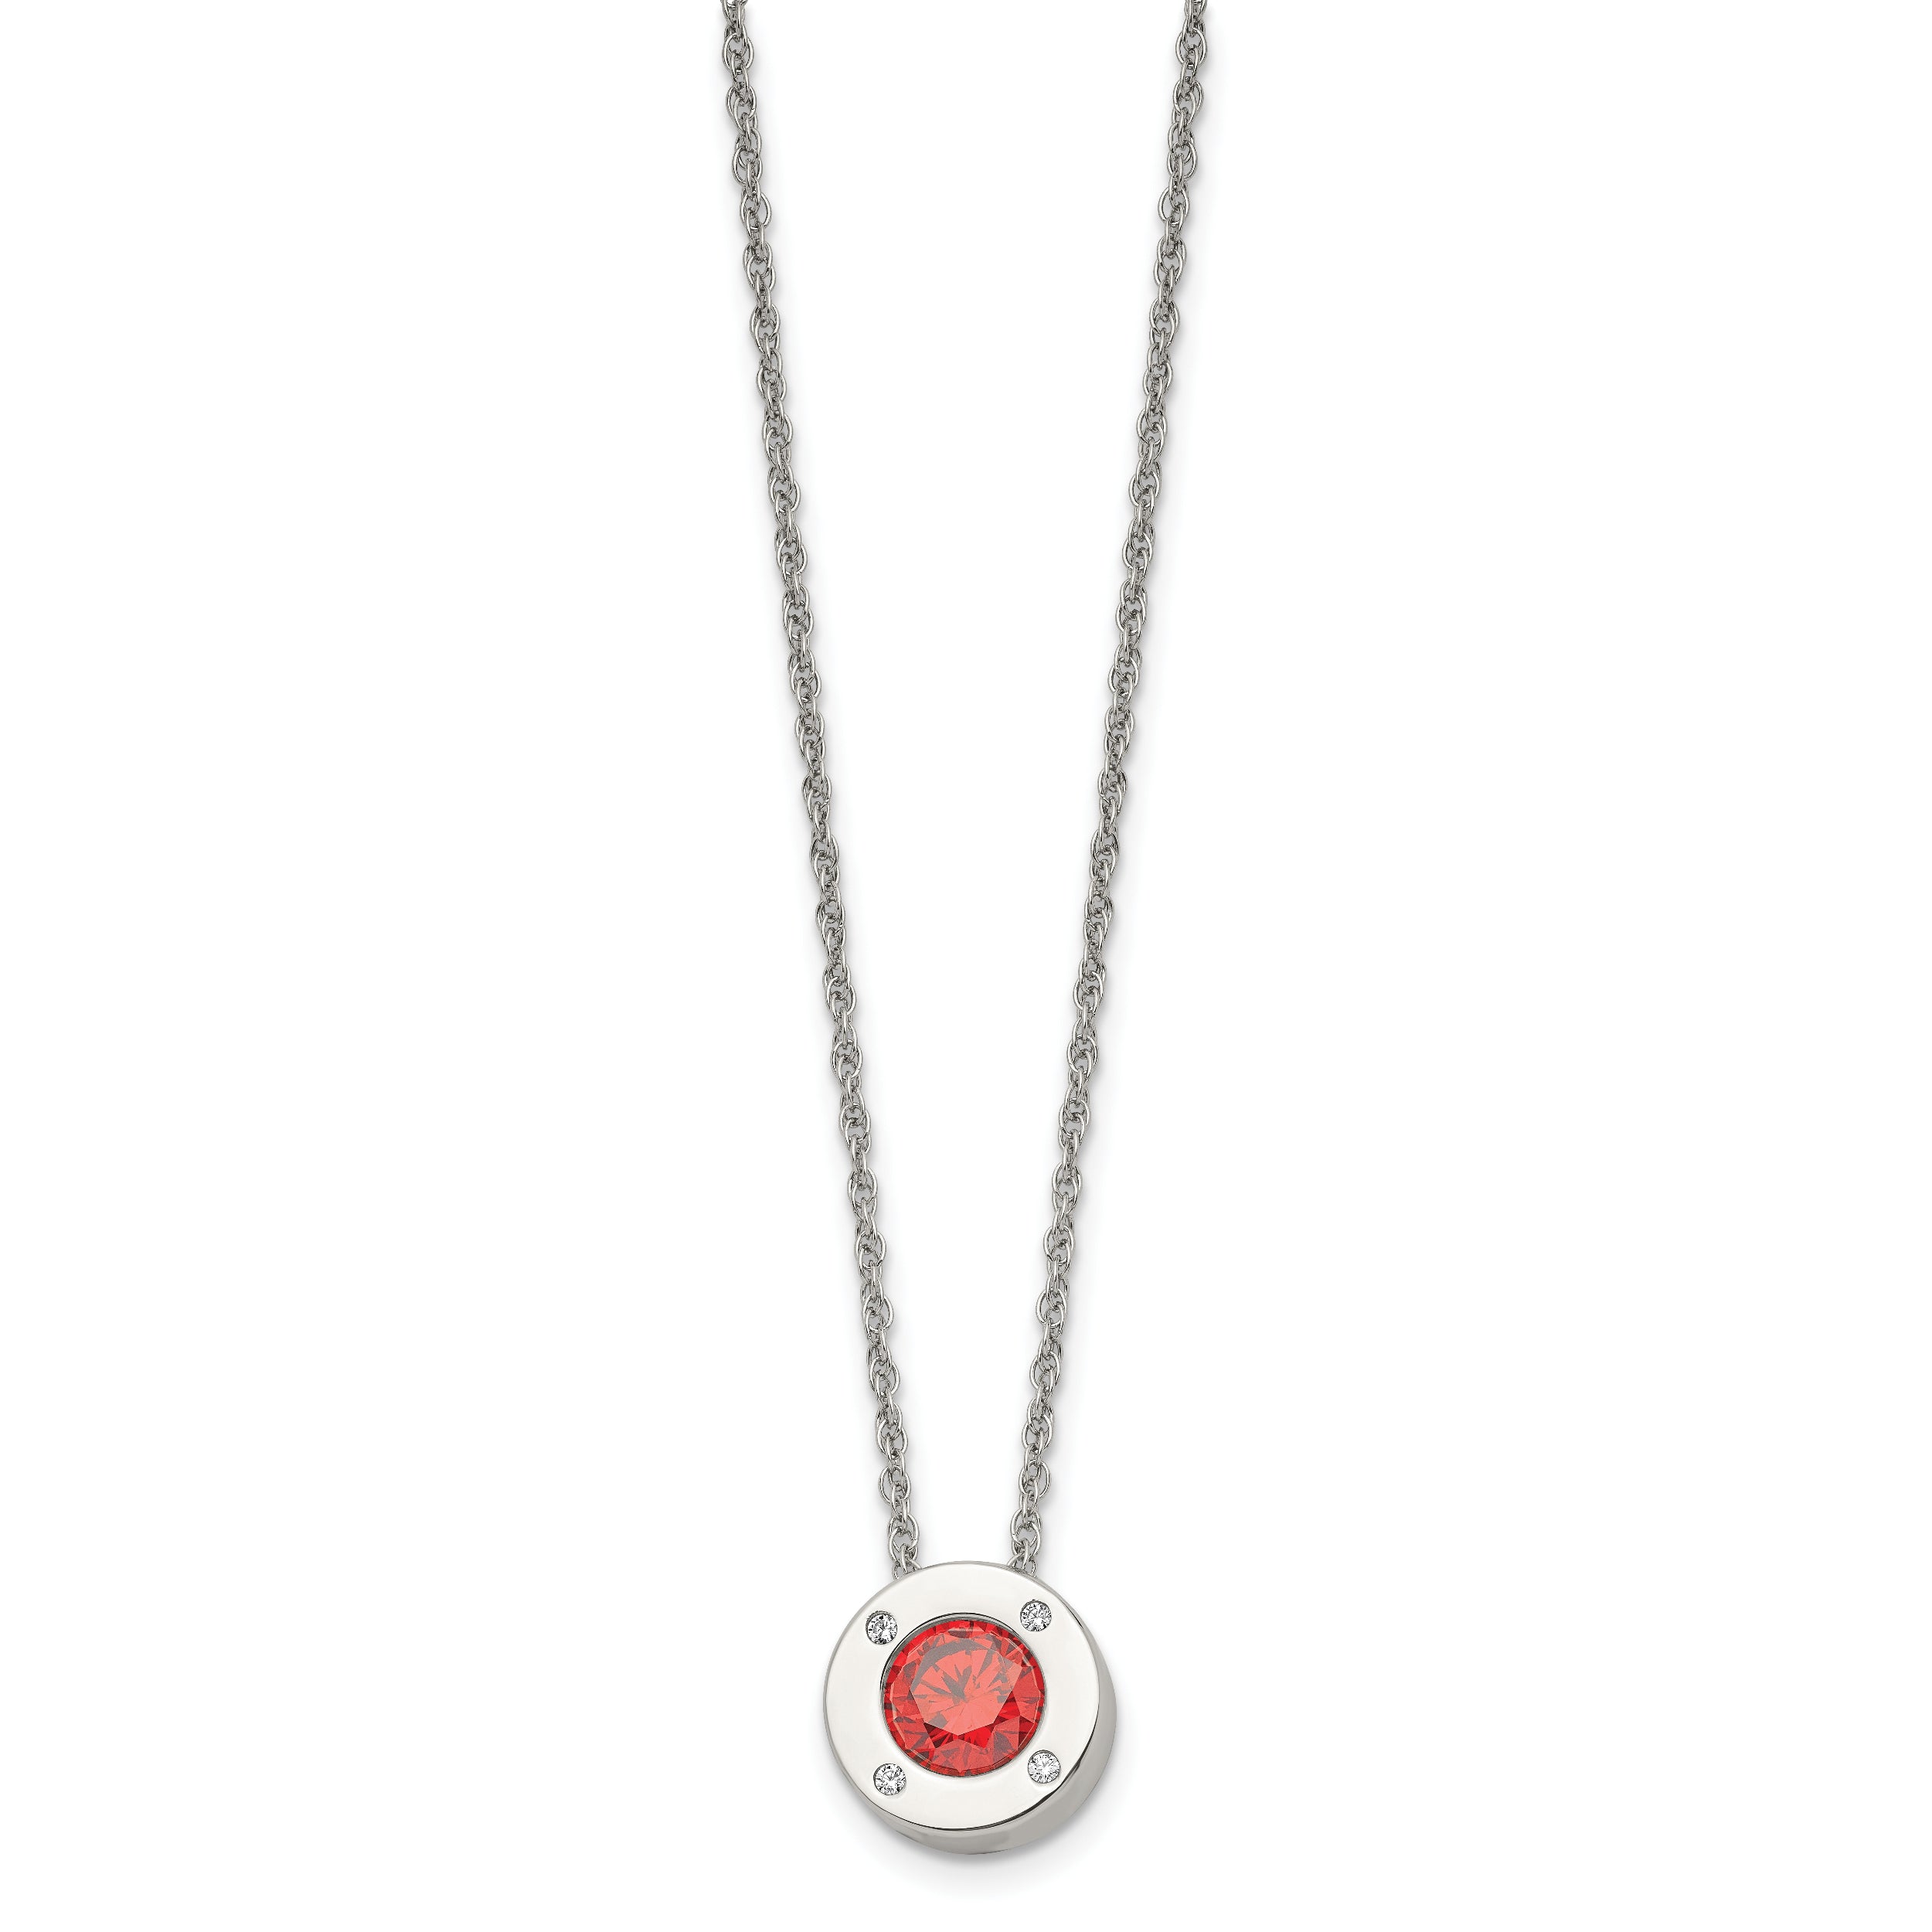 Chisel Stainless Steel Polished CZ July Birthstone Circle Pendant on a 20 inch Multi-Link Chain Necklace